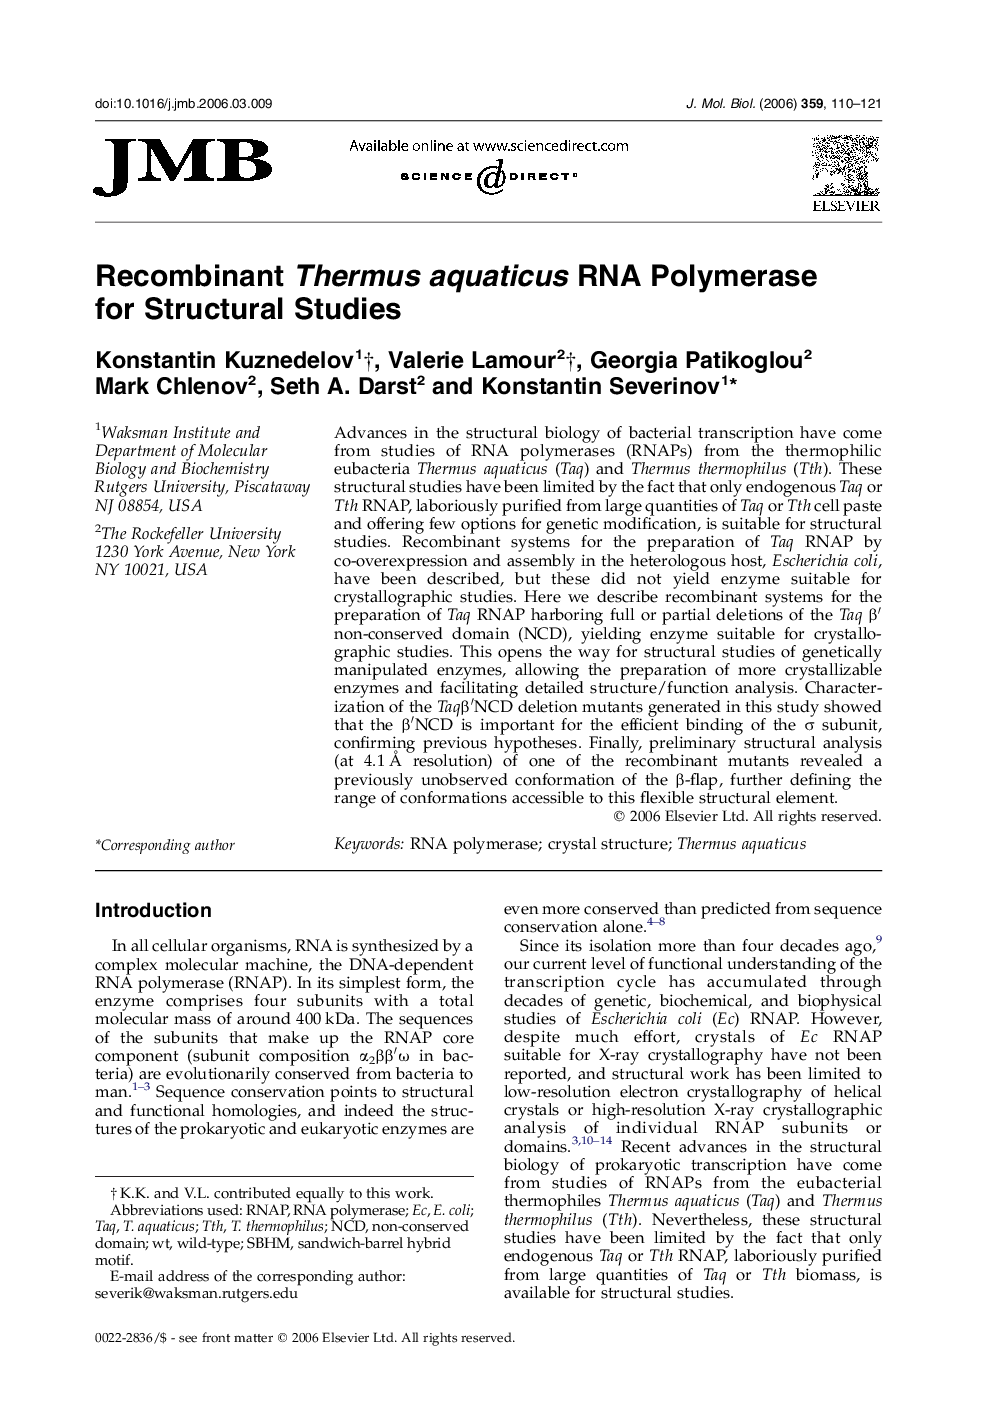 Recombinant Thermus aquaticus RNA Polymerase for Structural Studies